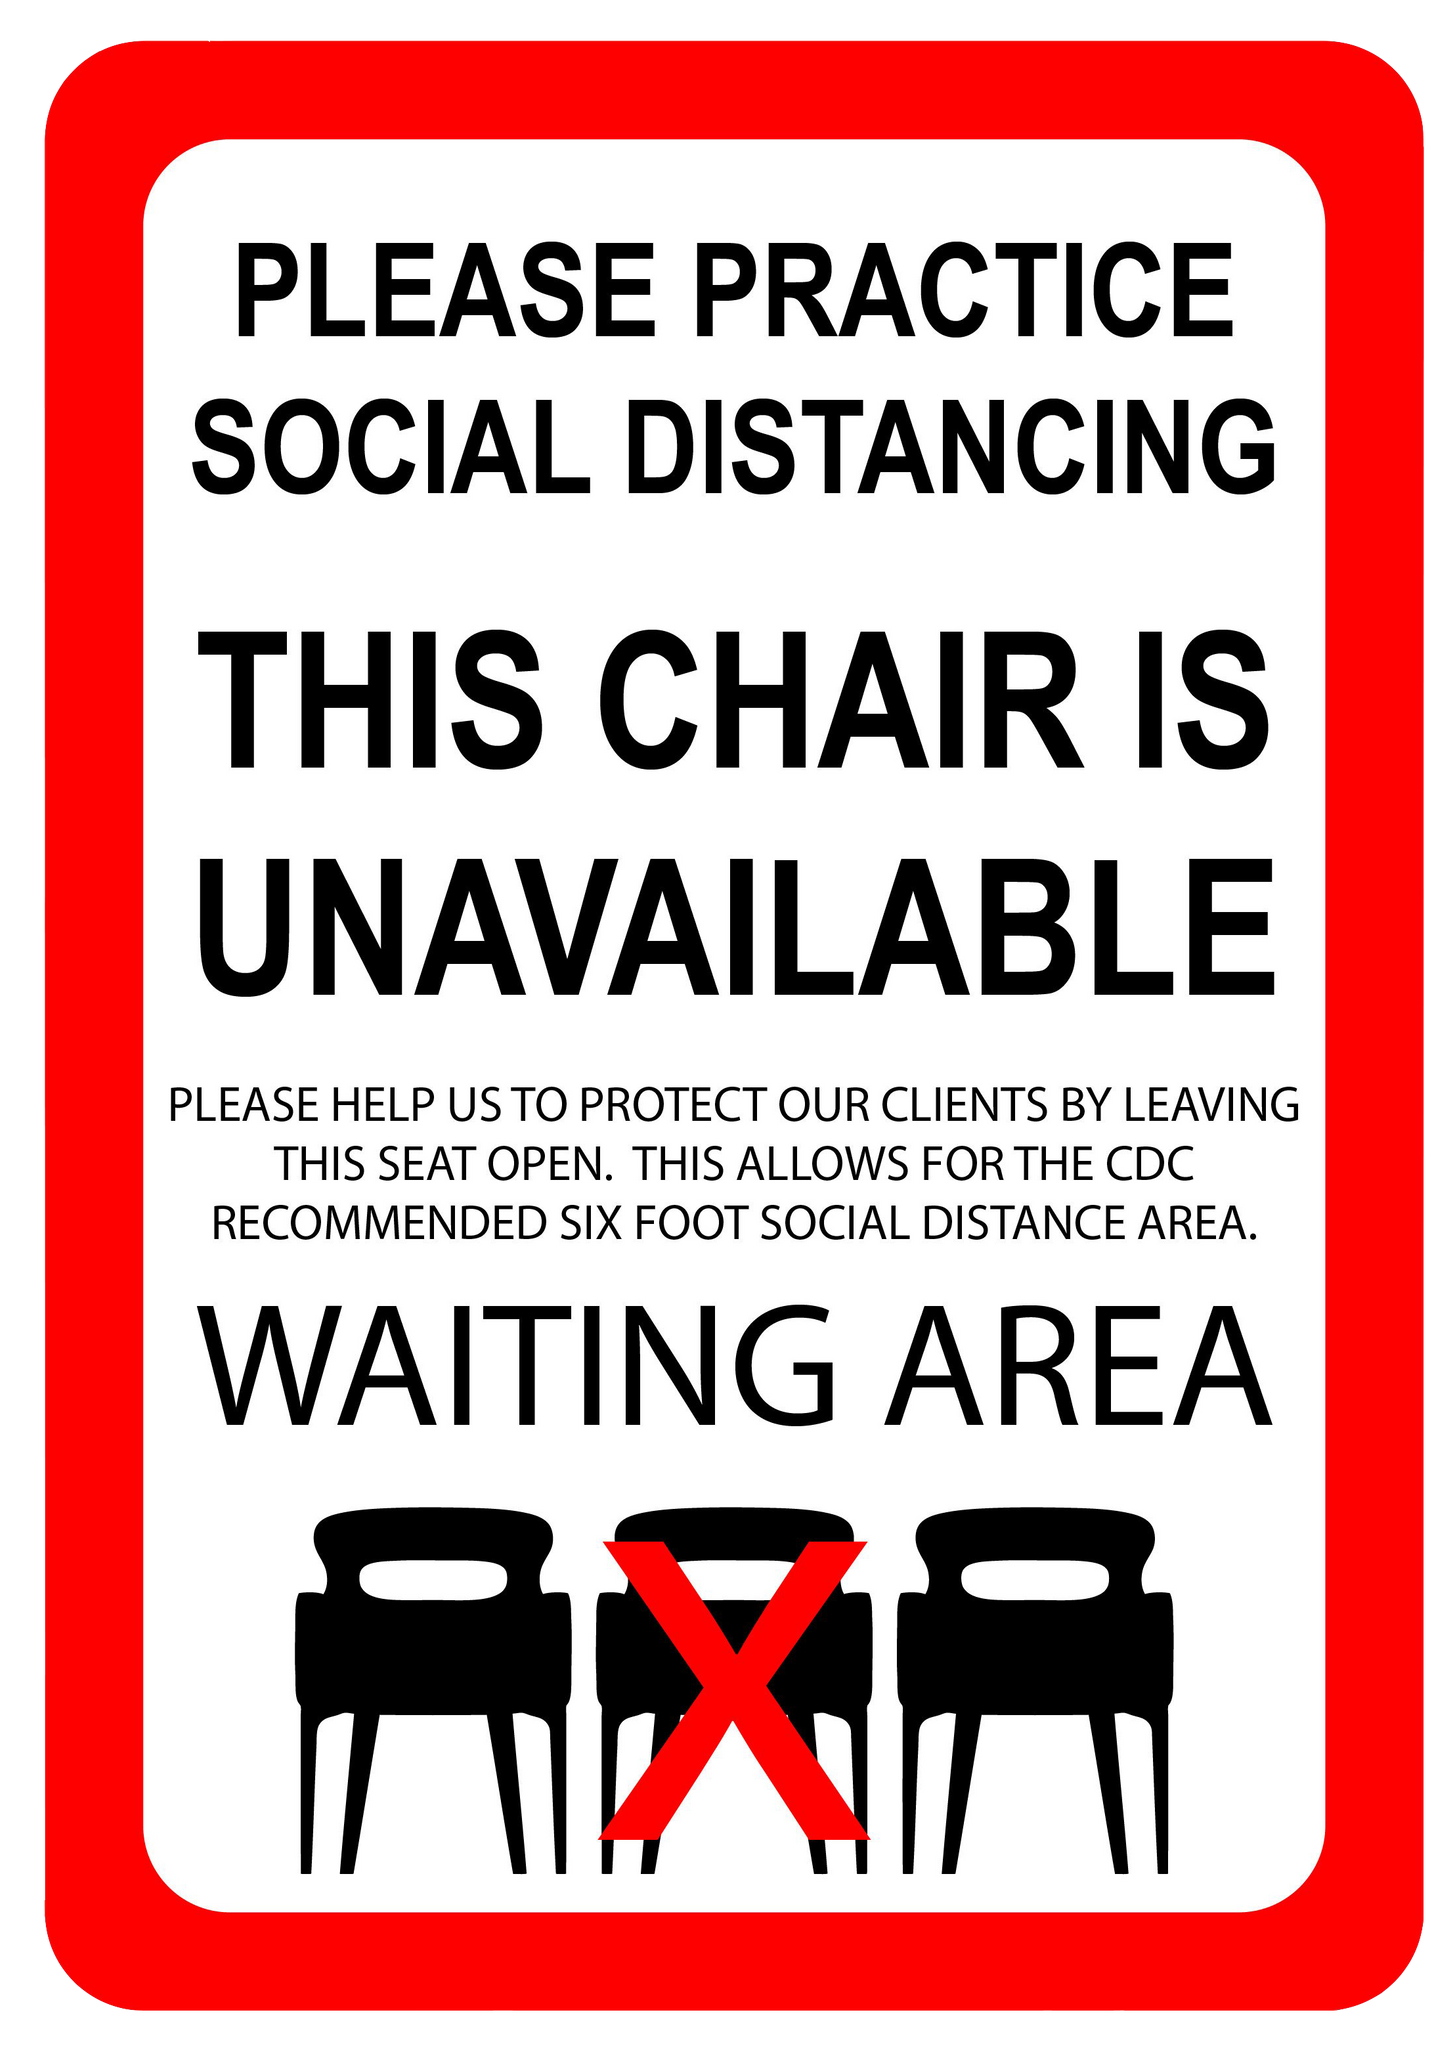 "Practice Social Distancing, Chair Unavailable" Adhesive Durable Vinyl Decal- 7x10”